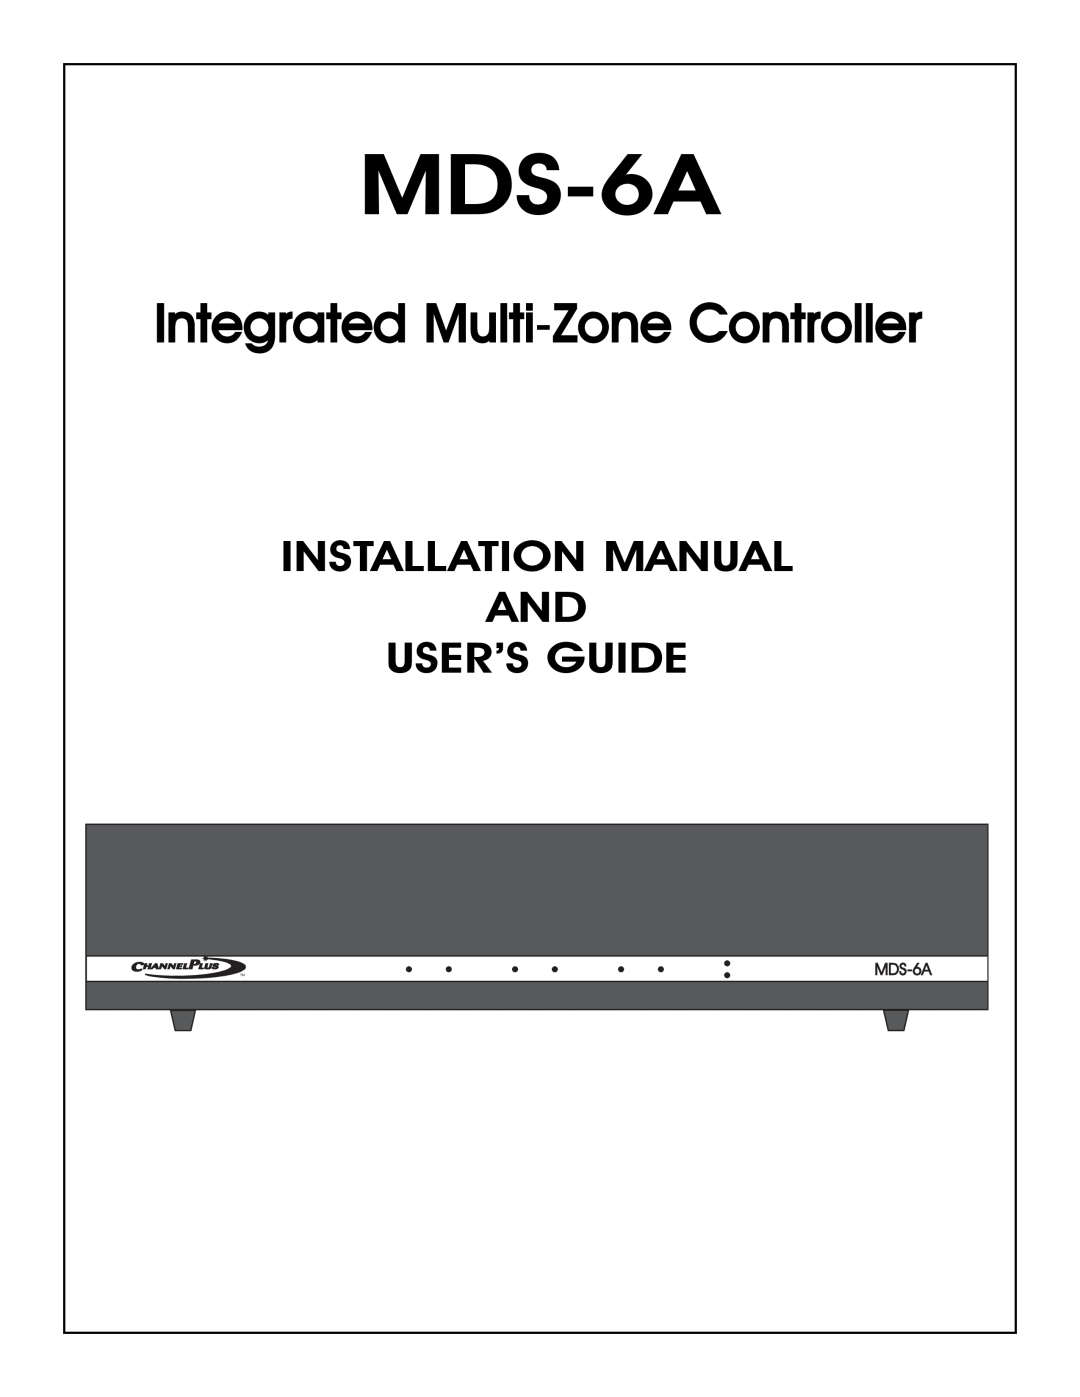 Channel Plus MDS-6A installation manual Installation Manual And User’S Guide, Integrated Multi-ZoneController 